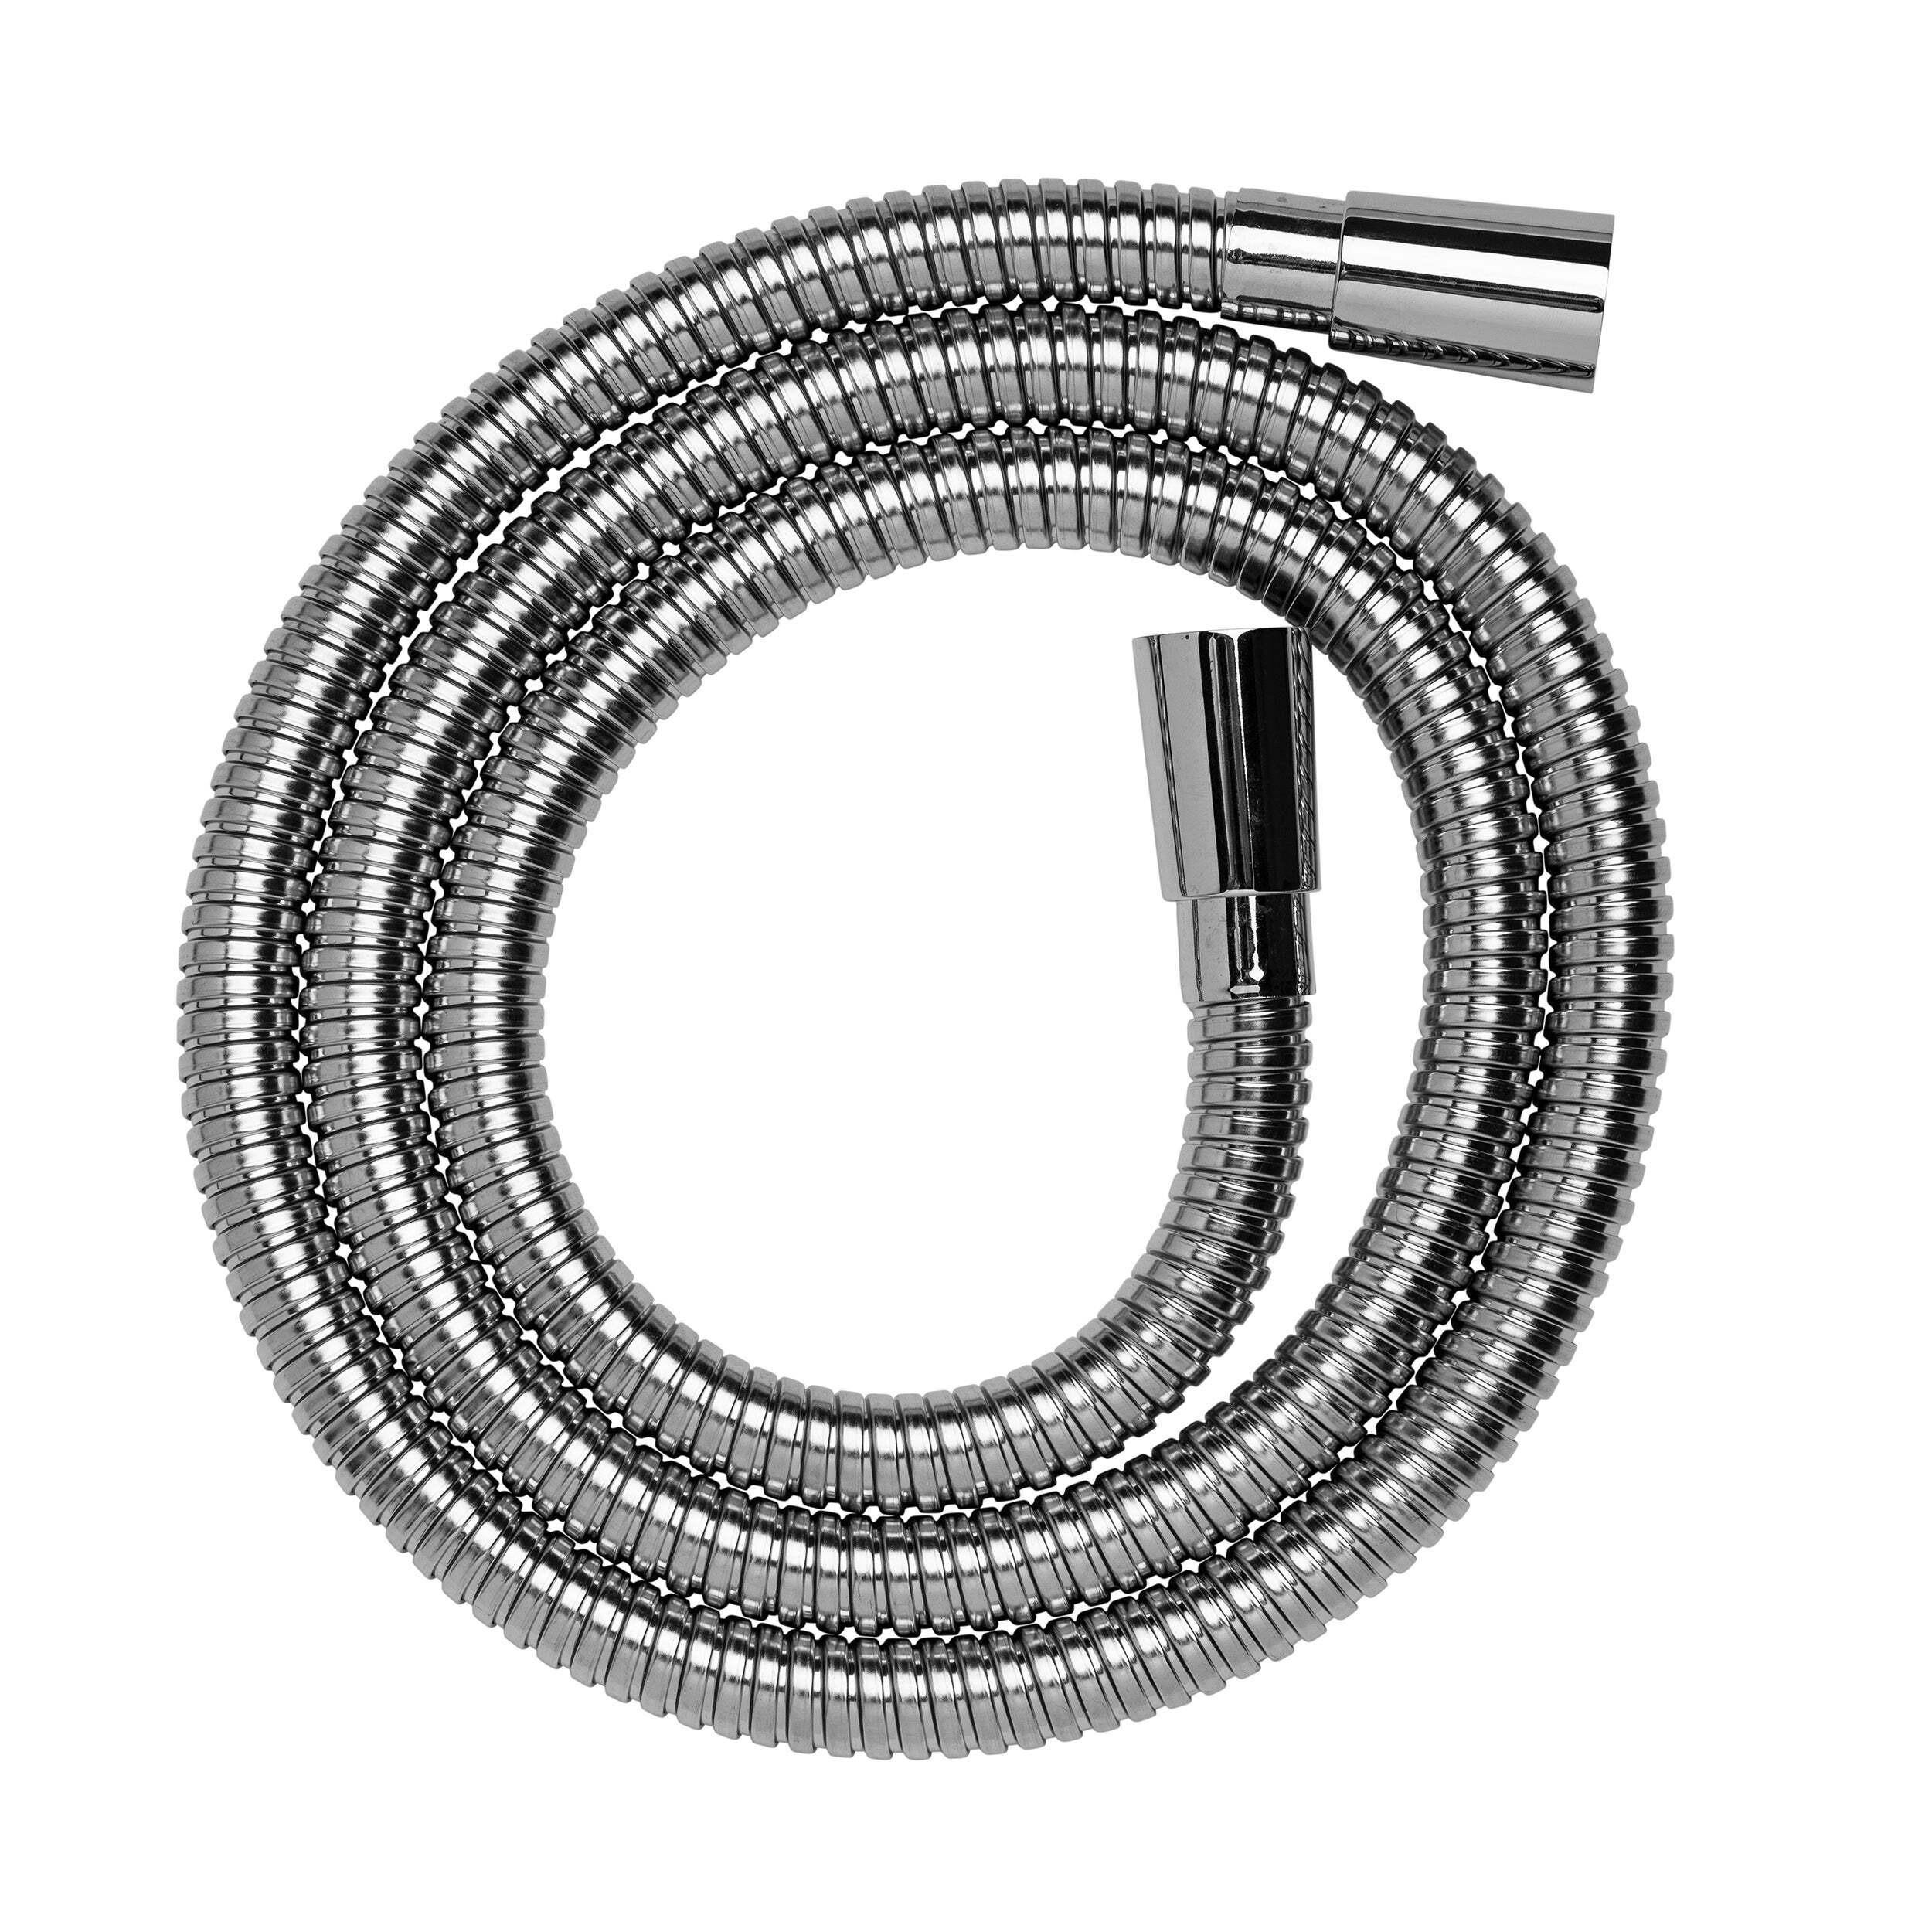 1.5m Reinforced Stainless Steel Shower Hose, 11 mm Bore Silver